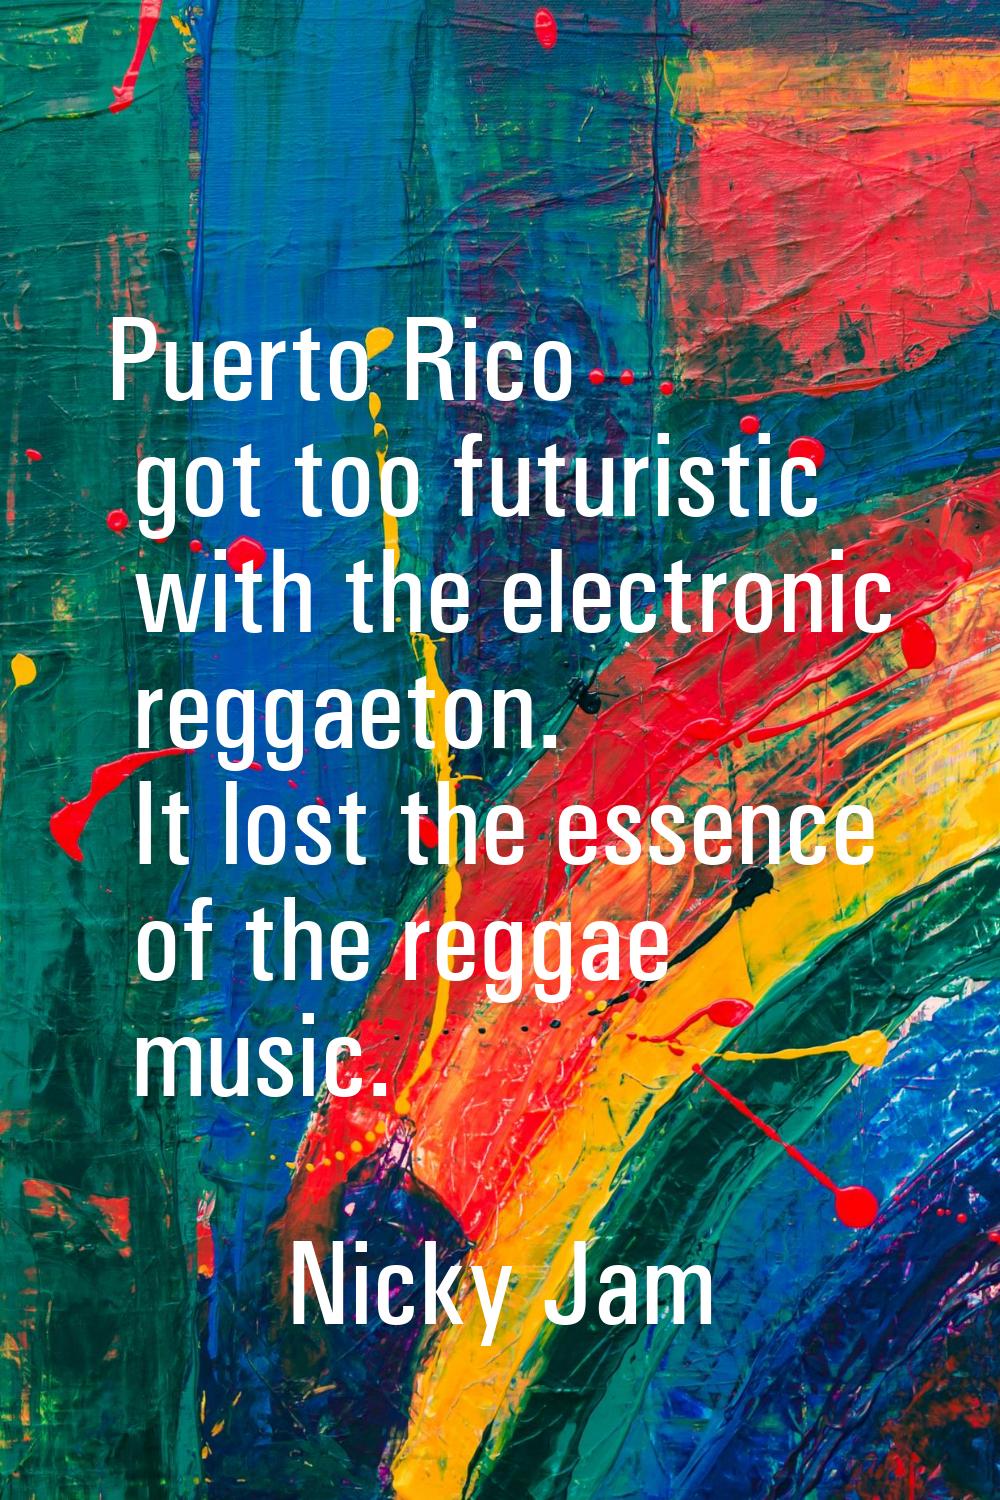 Puerto Rico got too futuristic with the electronic reggaeton. It lost the essence of the reggae mus